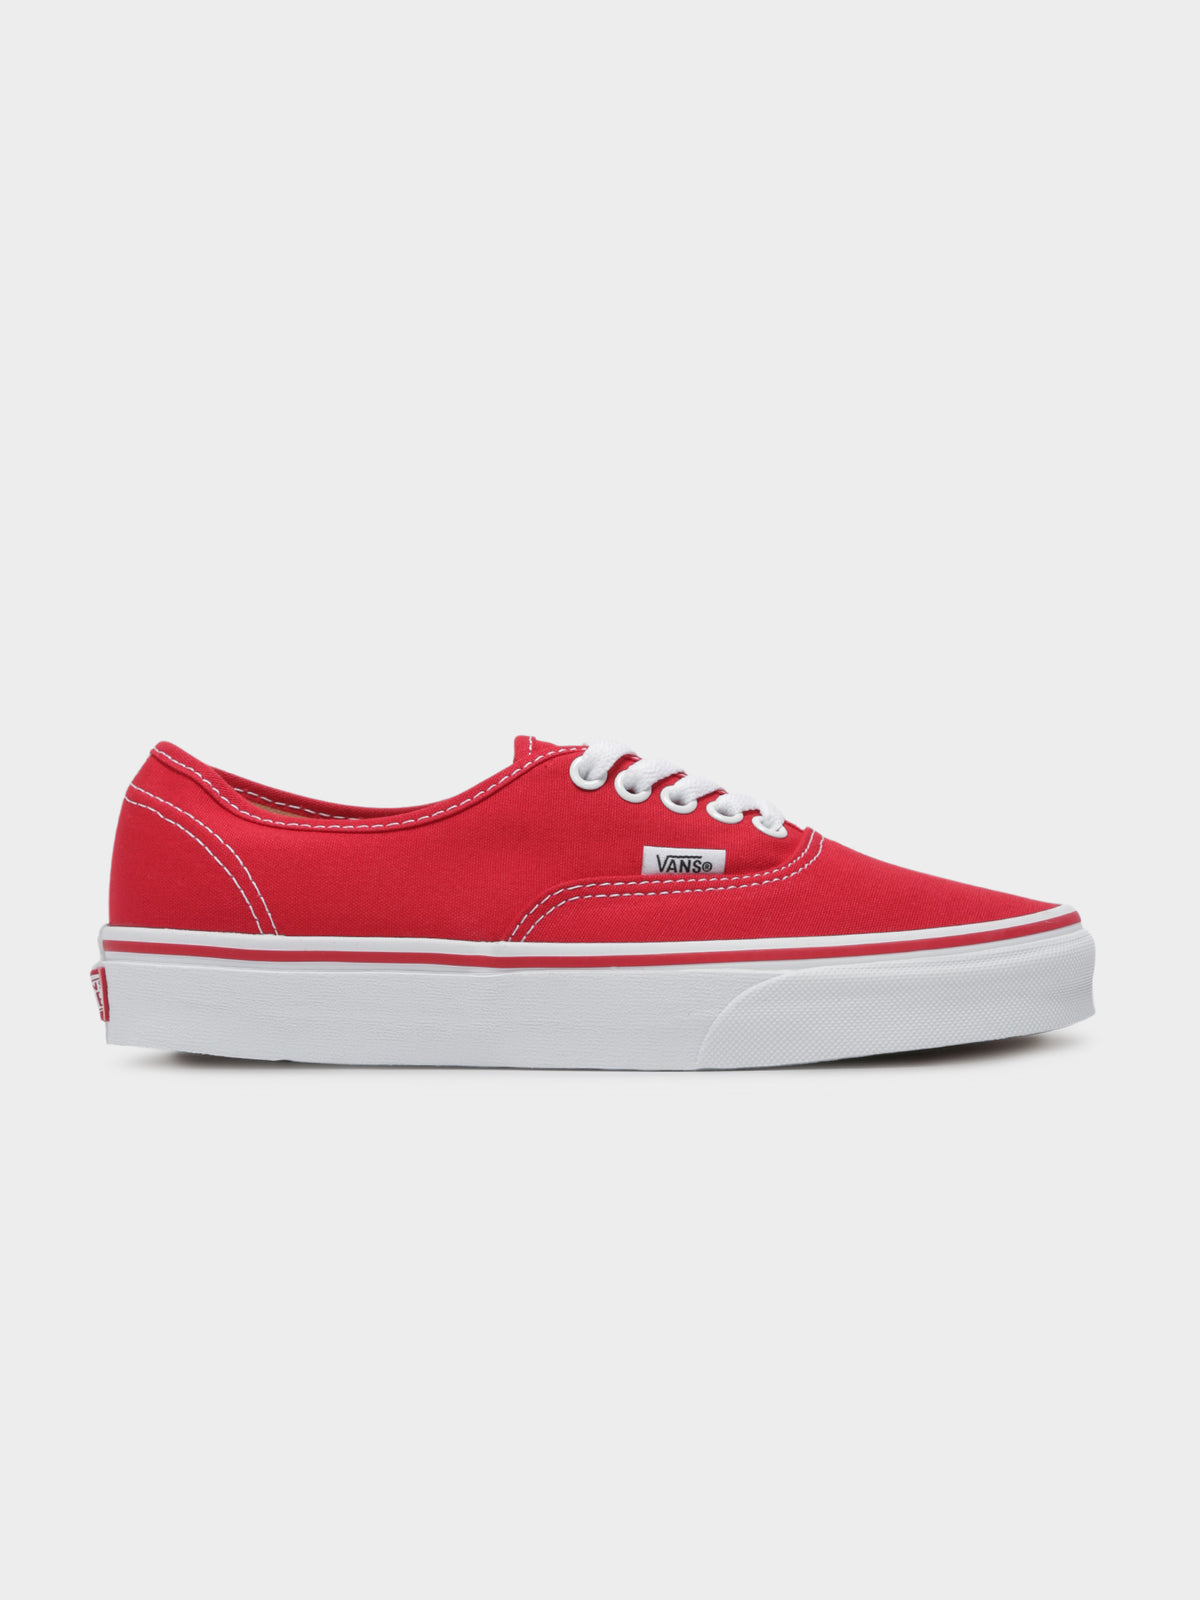 Unisex Authentic Sneakers in Red